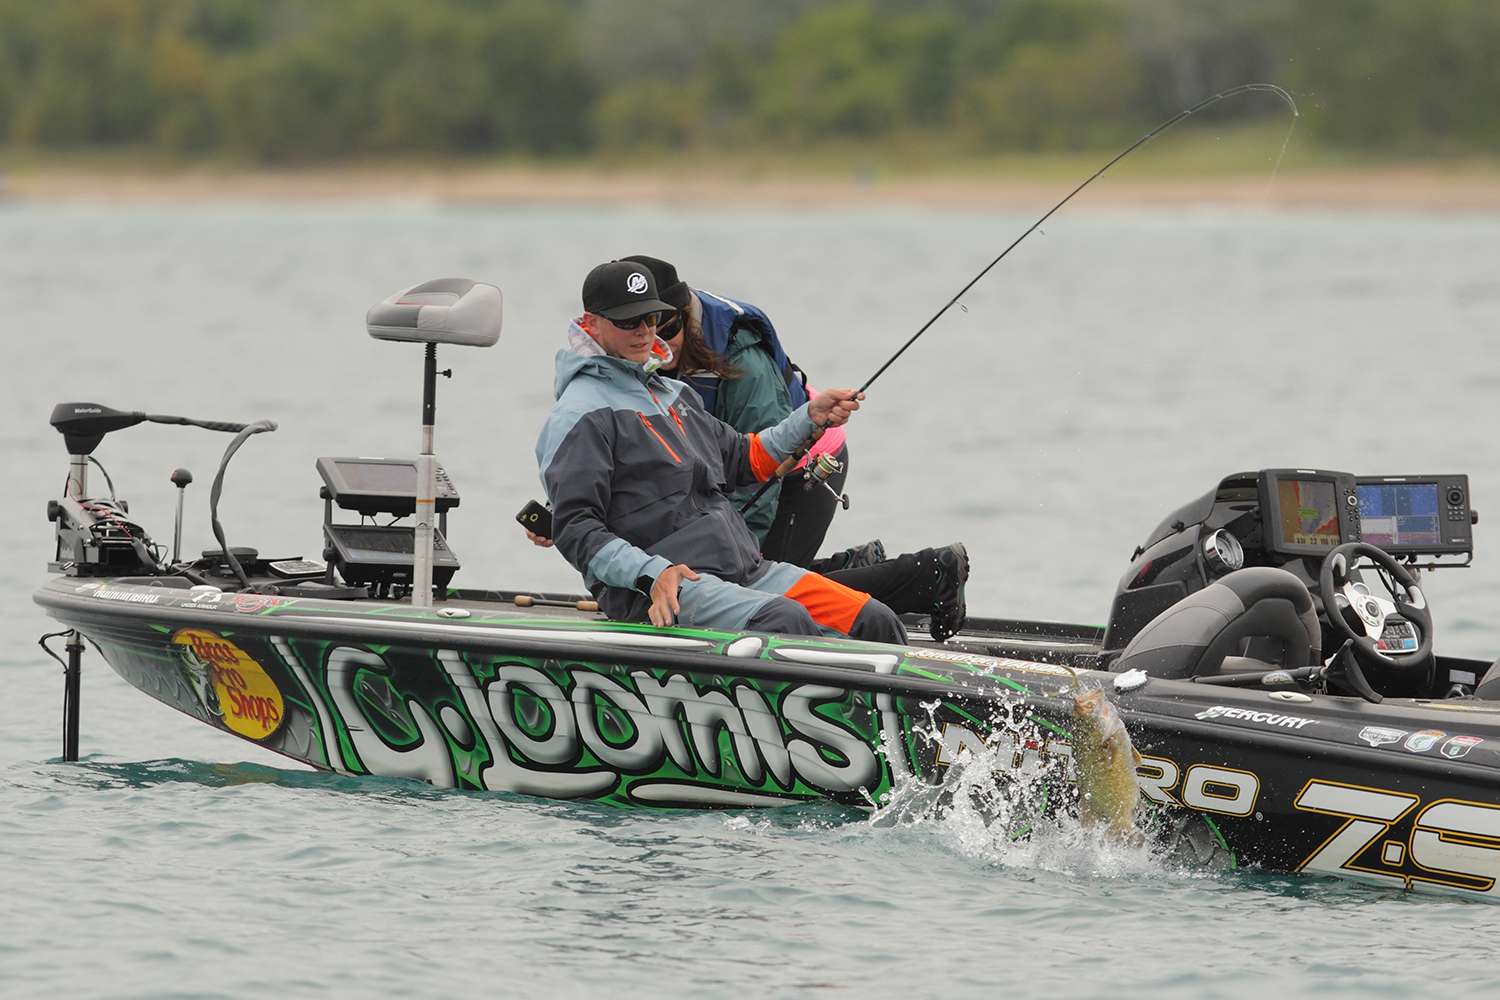 Known earlier in his career because he is the nephew of bass fishing superstar Kevin VanDam, 27-year-old Michigan native Jonathon VanDam is now blazing his own trail on the Bassmaster Elite Series.